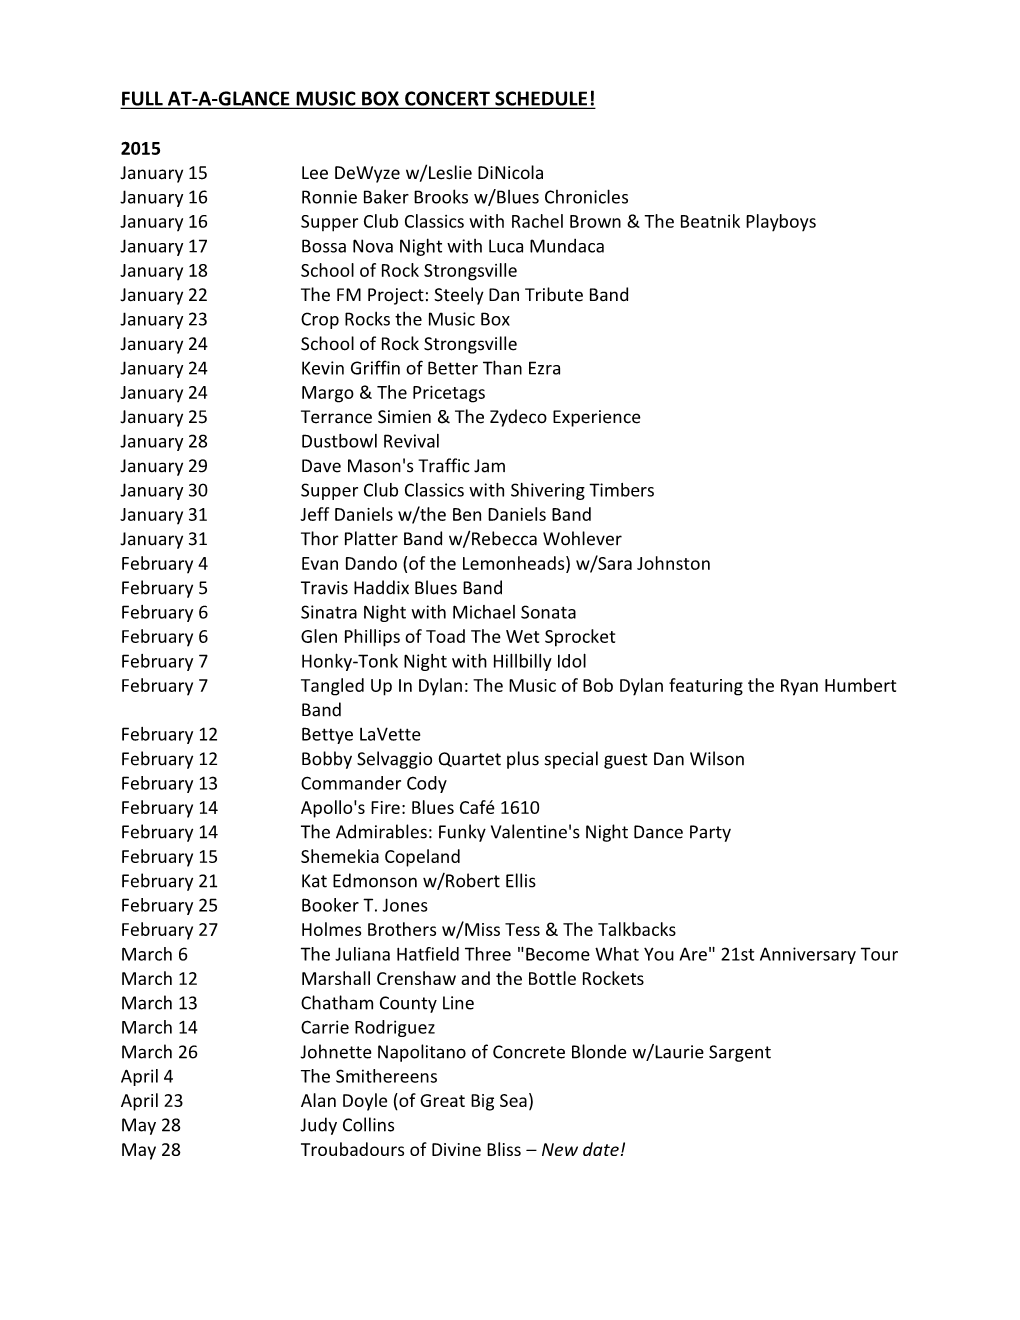 Full At-A-Glance Music Box Concert Schedule!